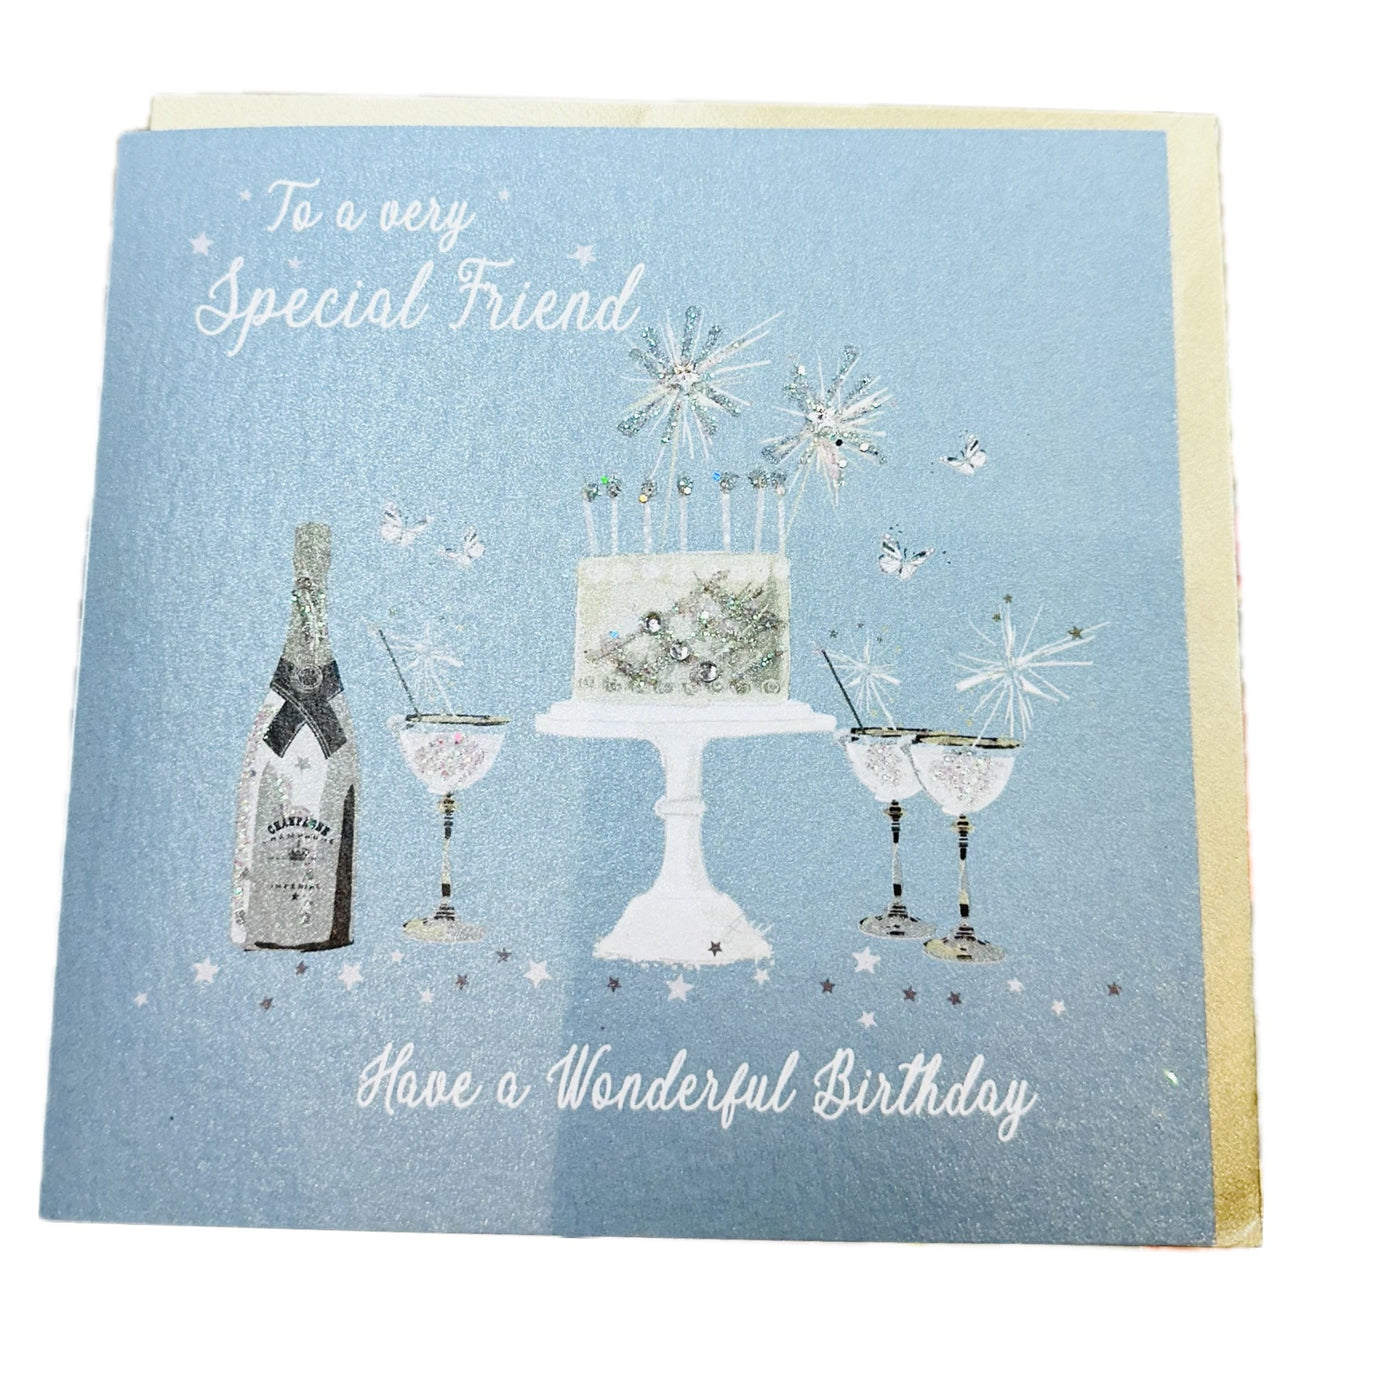 Special Friend Birthday Teal Blue Sparkly Cake & Glasses Card - White Cotton Cards